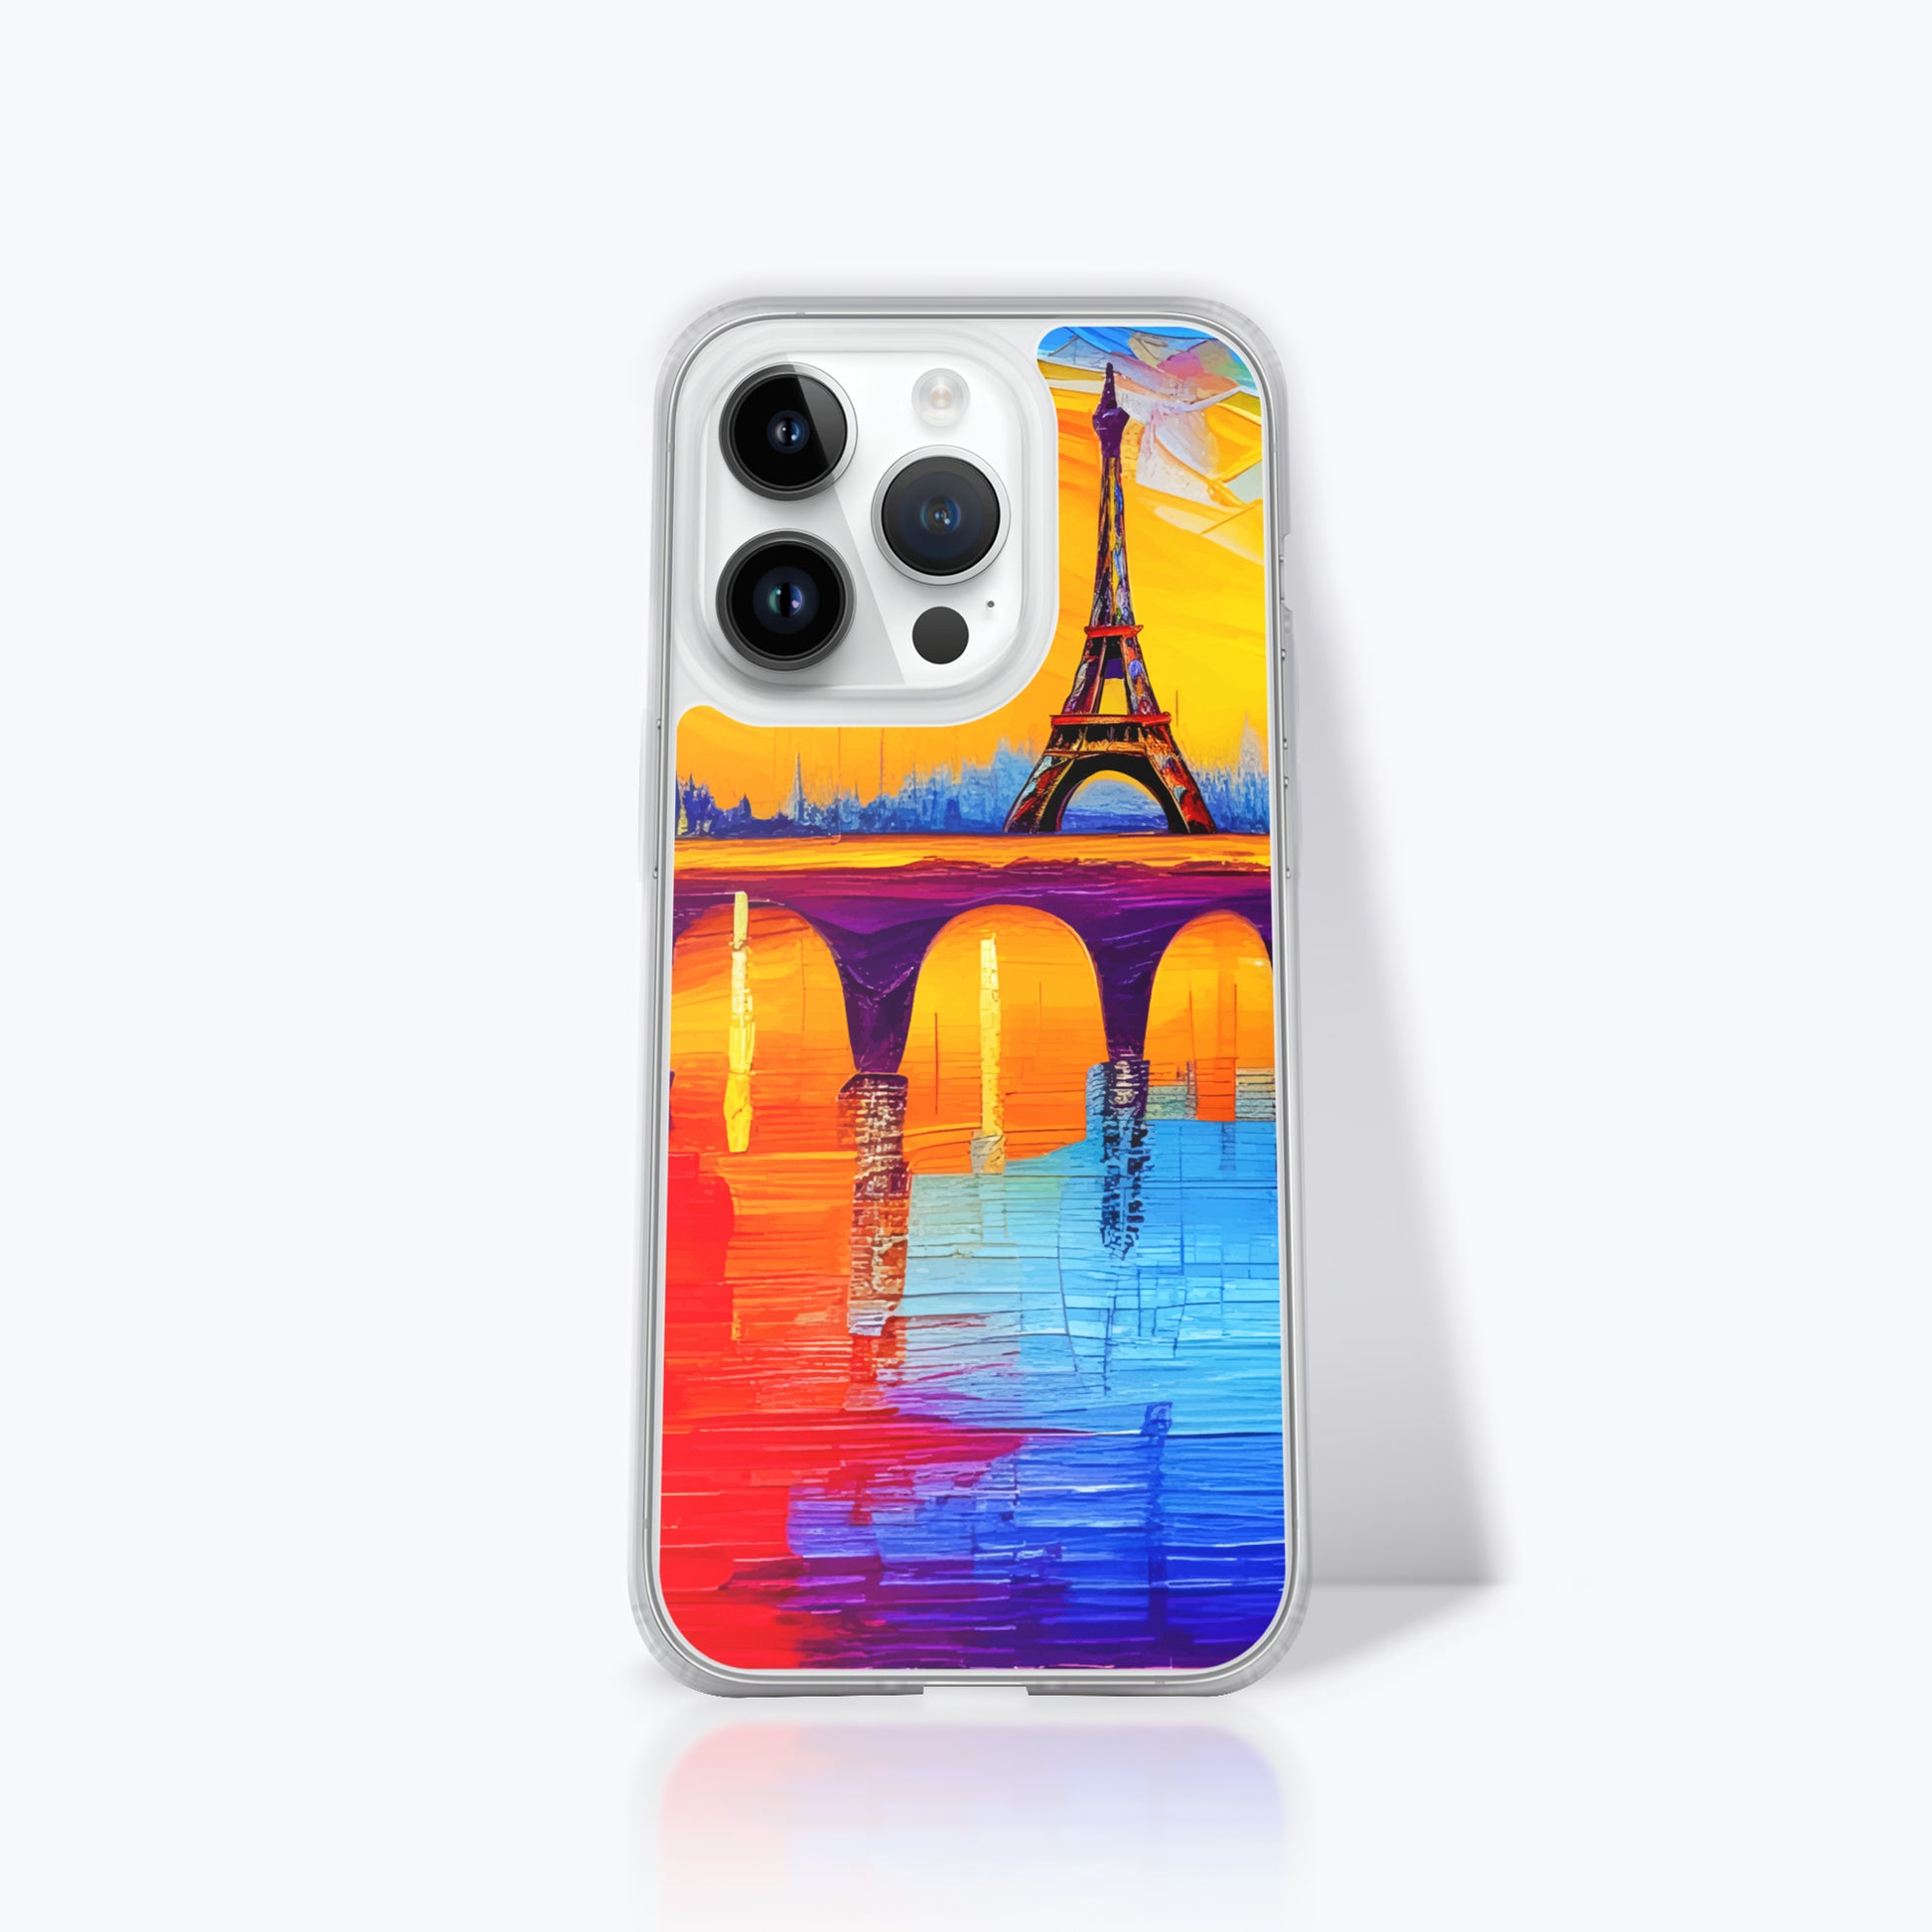 Fashionable iPhone Case with cityscape painting - Paris Eiffel Tower| Seepu | 